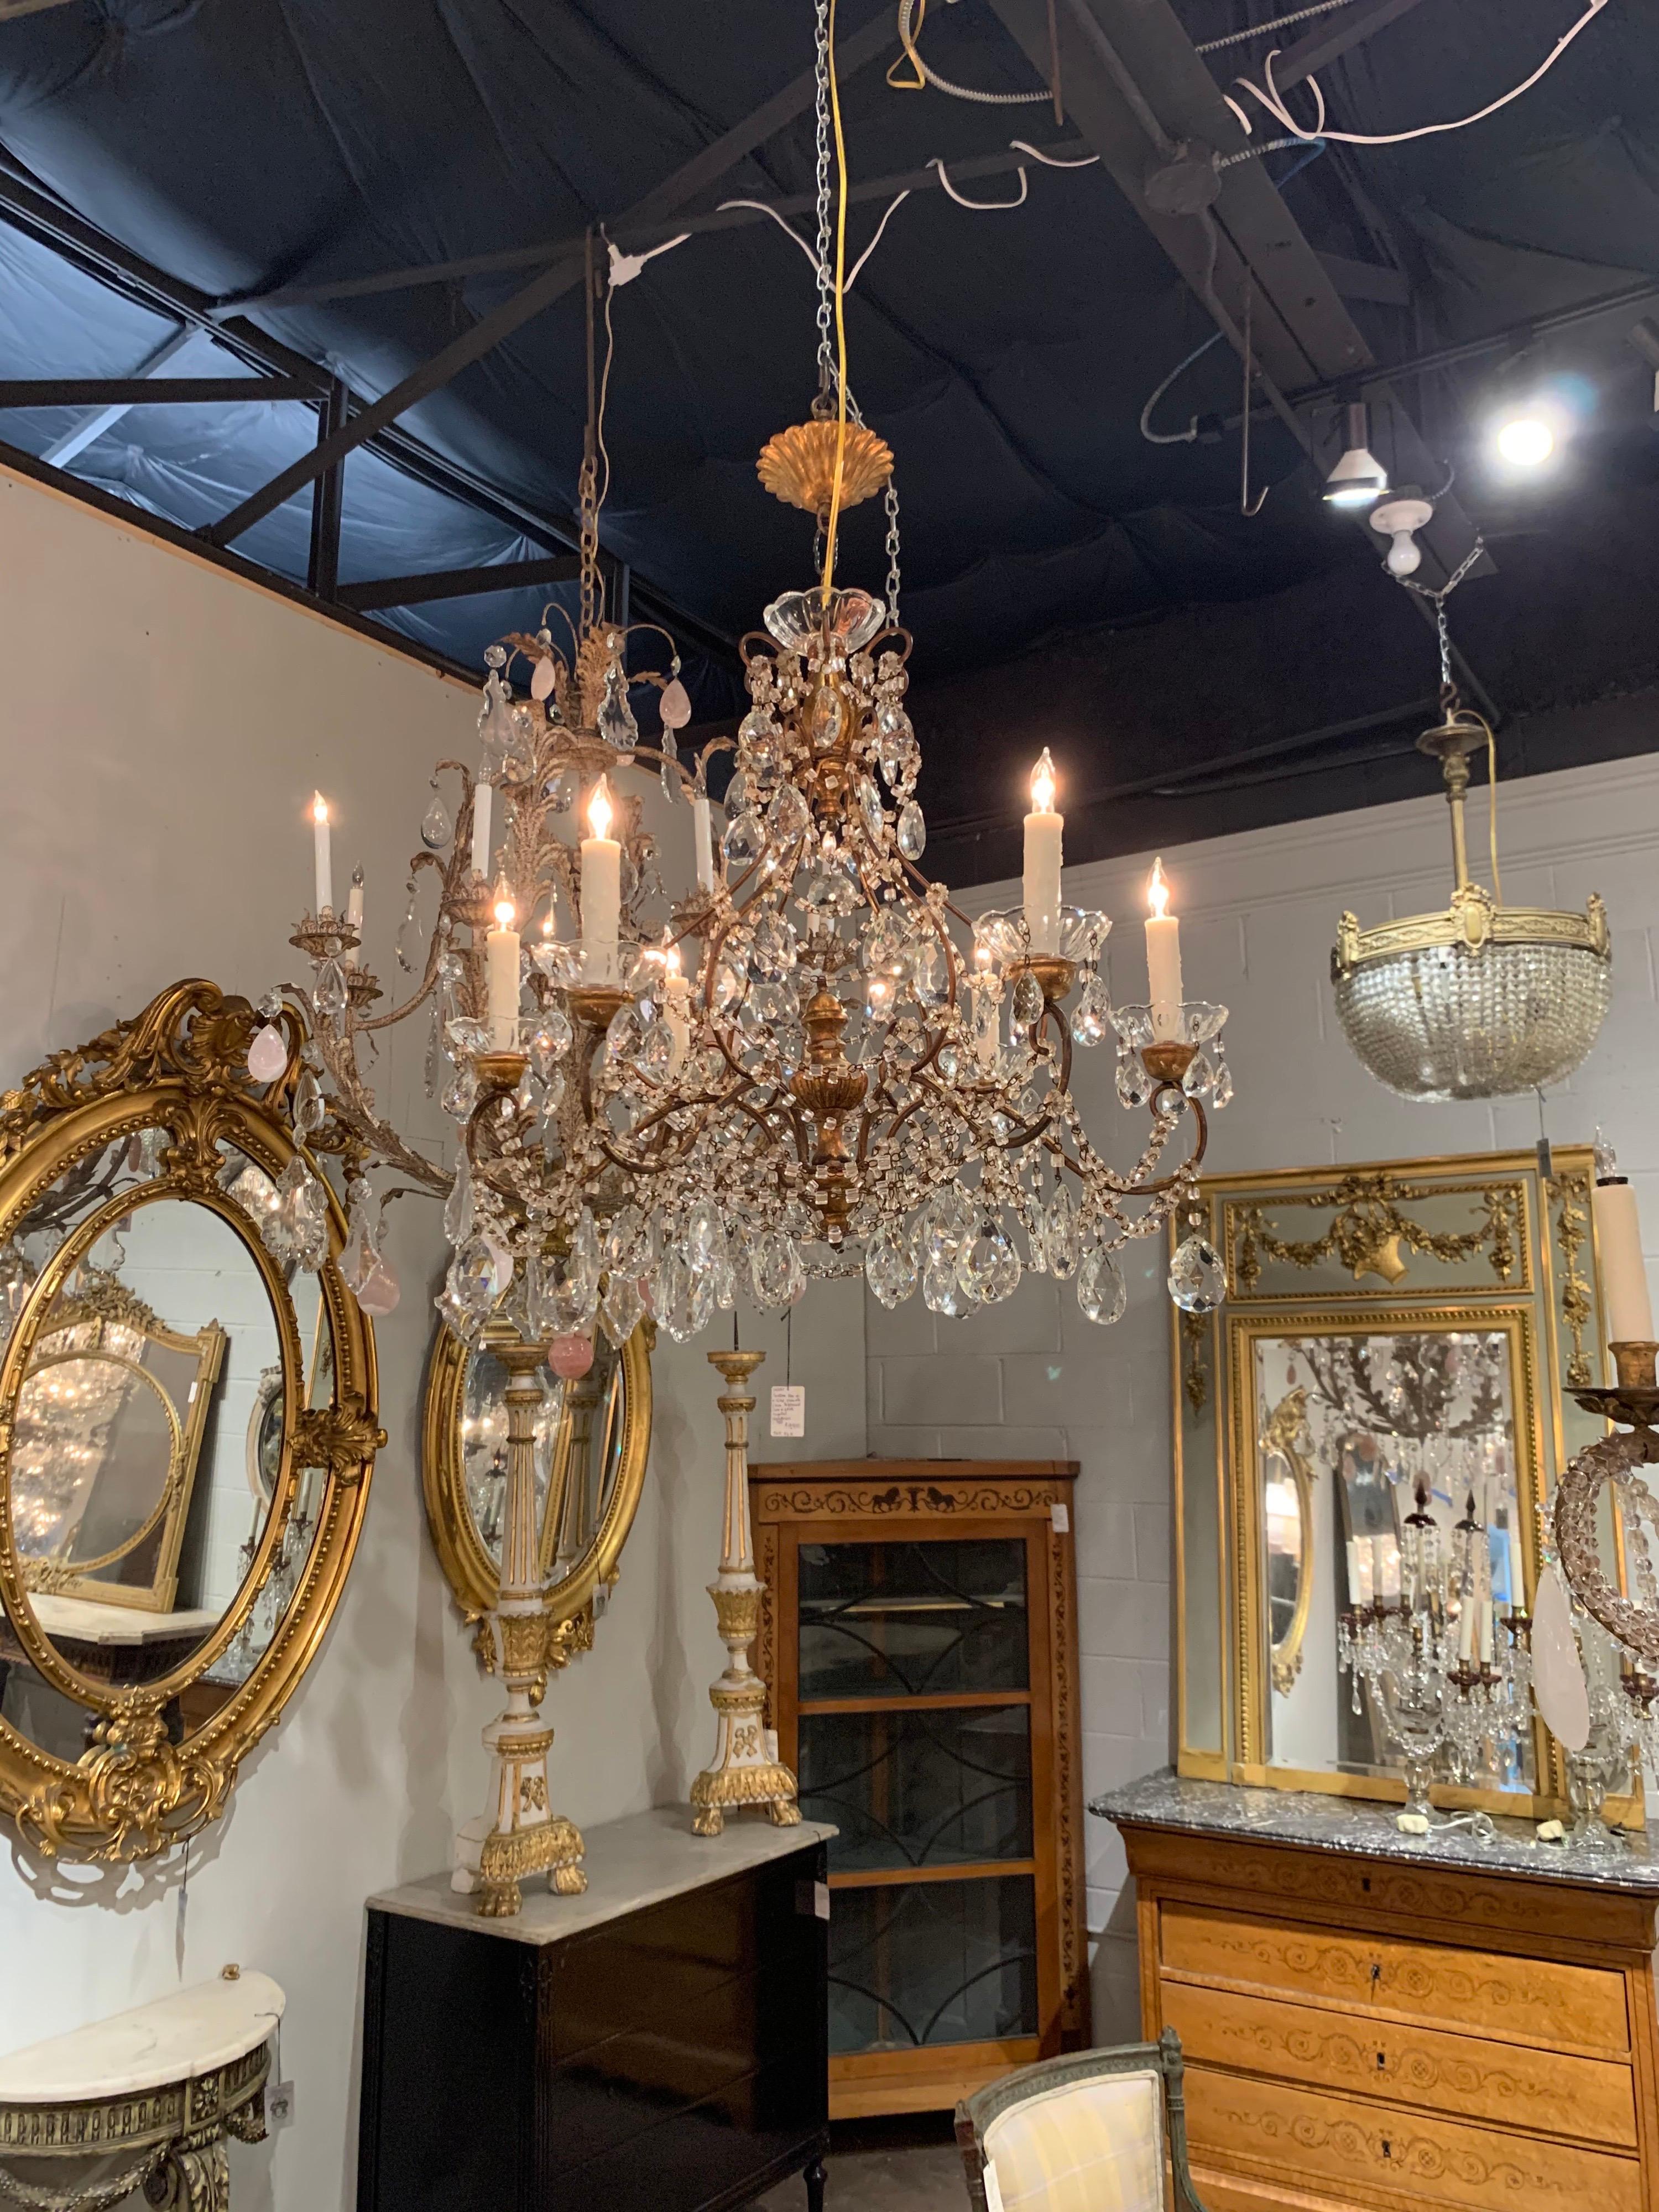 Early 20th century Italian giltwood and beaded crystal chandelier with 6 lights. Featuring a large array of beads and crystals. Great scale and shape on this piece. Exquisite!
 